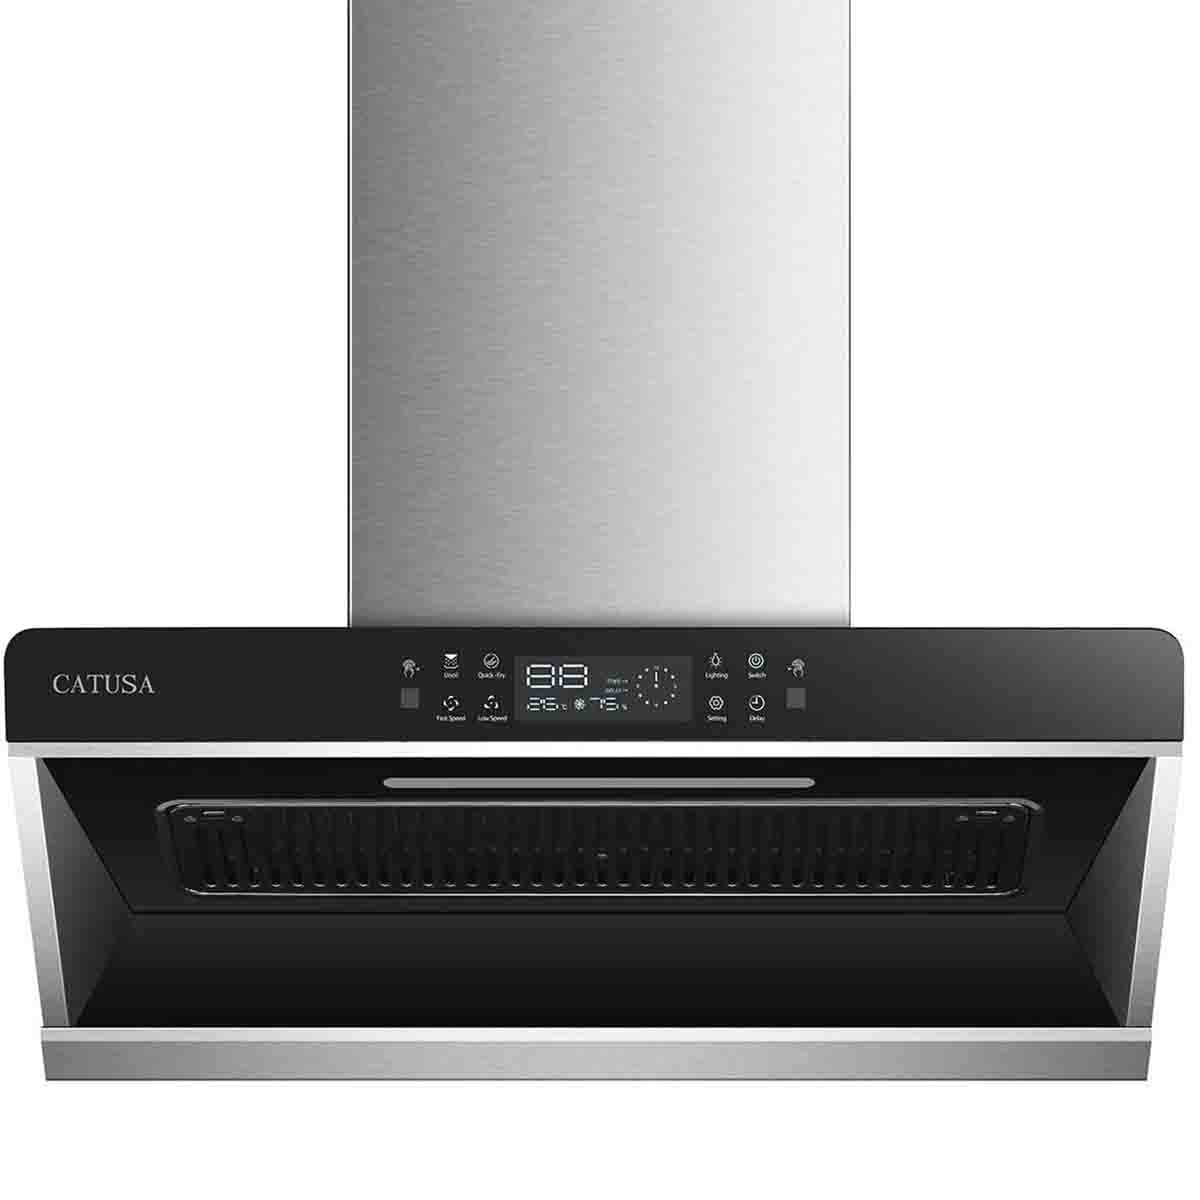 36" Wall Mount Stainless Steel Push Panel Kitchen Range Hood for sale online